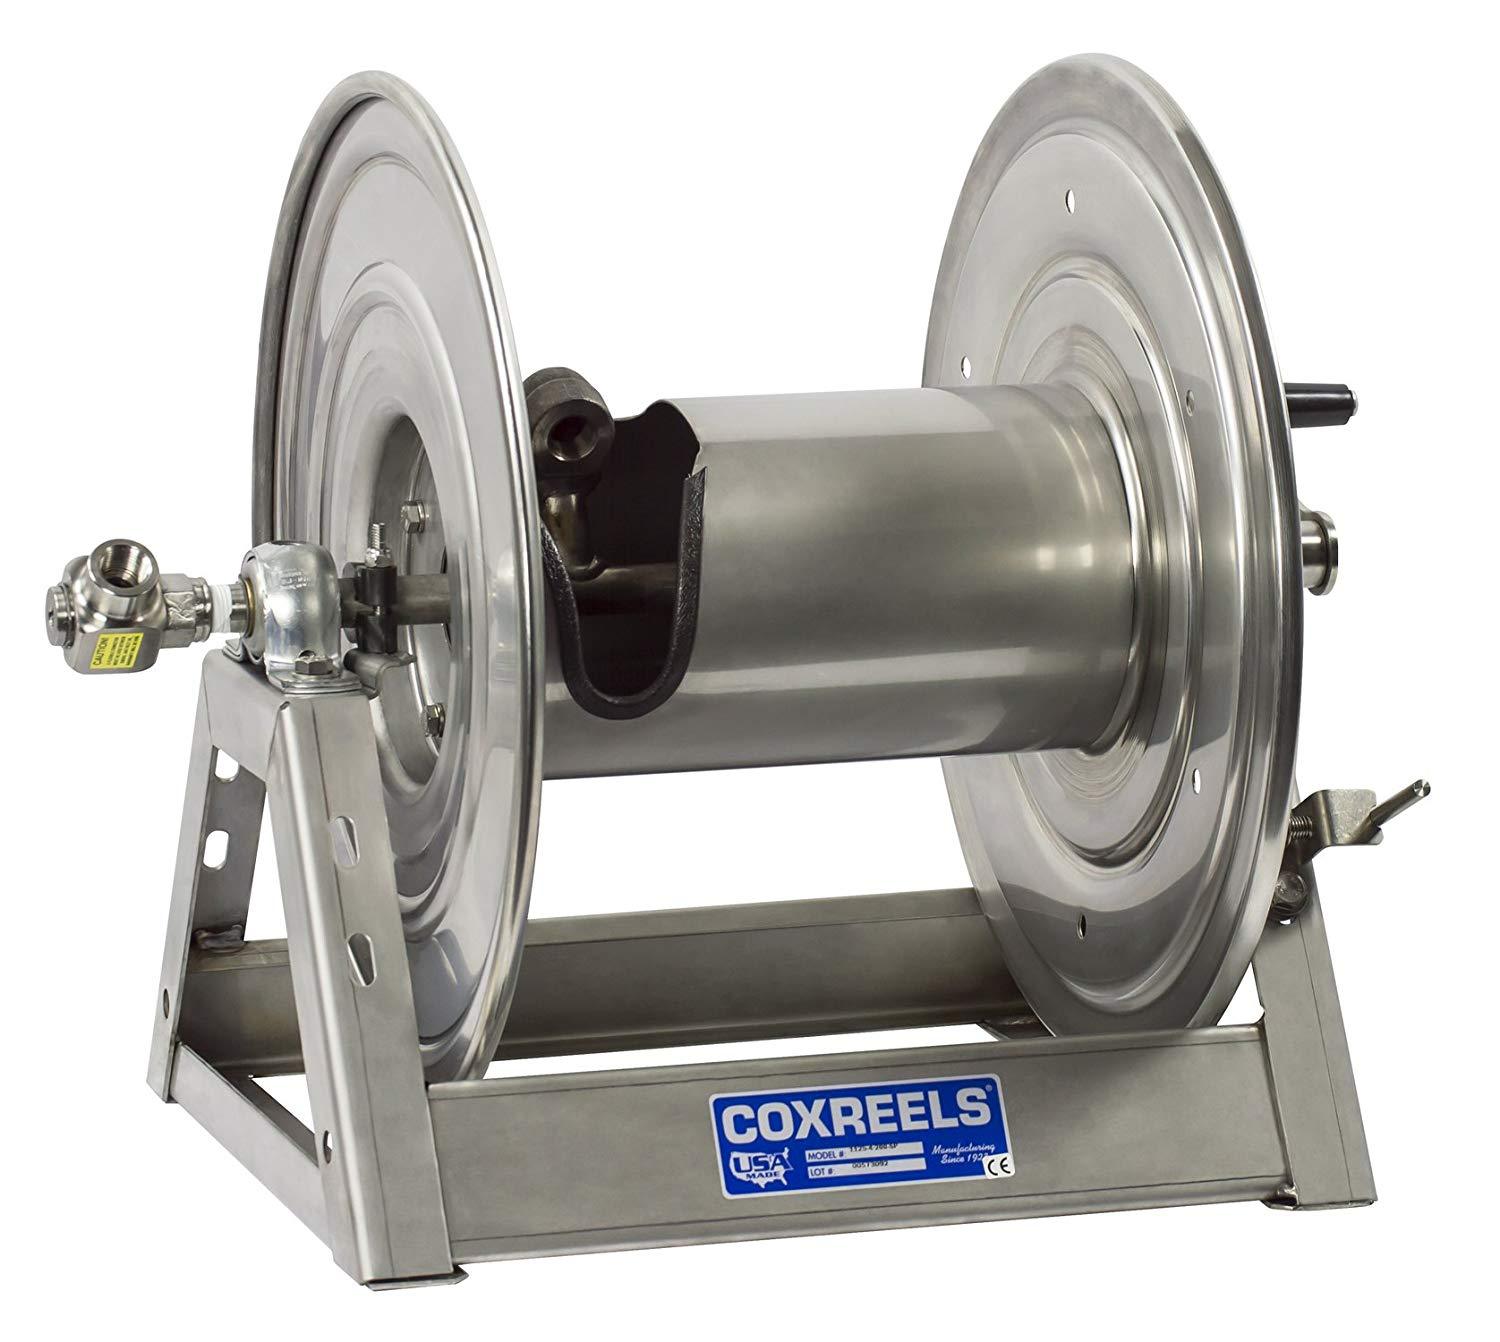 1125-5-100-A-SP : Coxreels 1125-5-100-A-SP Stainless Steel Compressed Air #4 Gast Motor Rewind Hose Reel, 3/4" ID, 100' capacity, NO HOSE, 3000psi